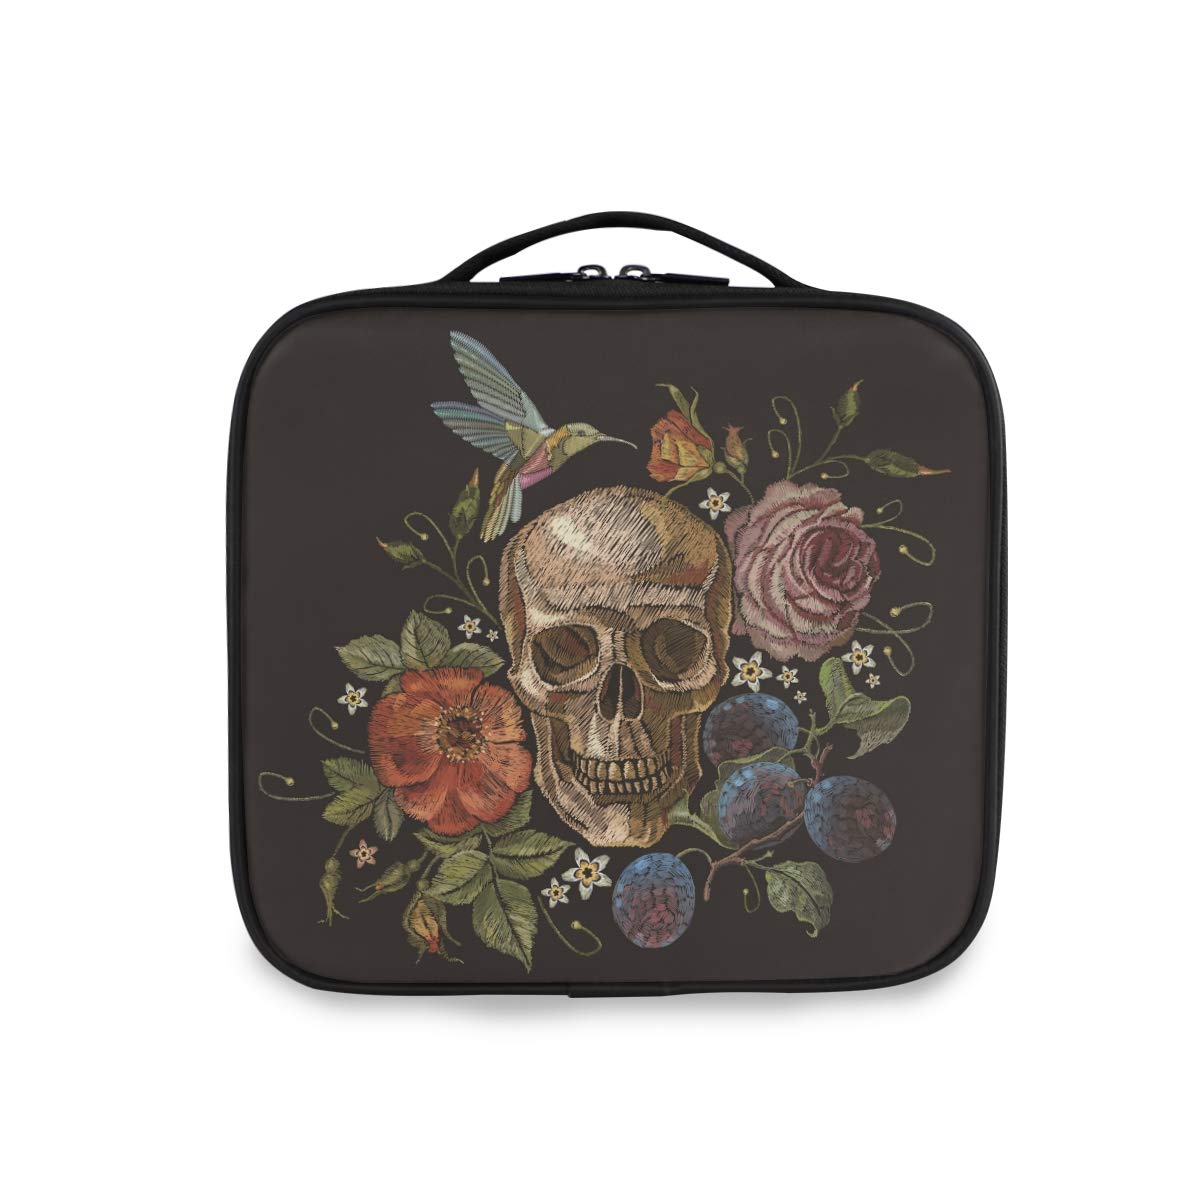 ALAZA Travel Makeup Case, Day of The Dead Skull Rose Humming Bird Dia Muertos Cosmetic toiletry Travel bag for Women Girls